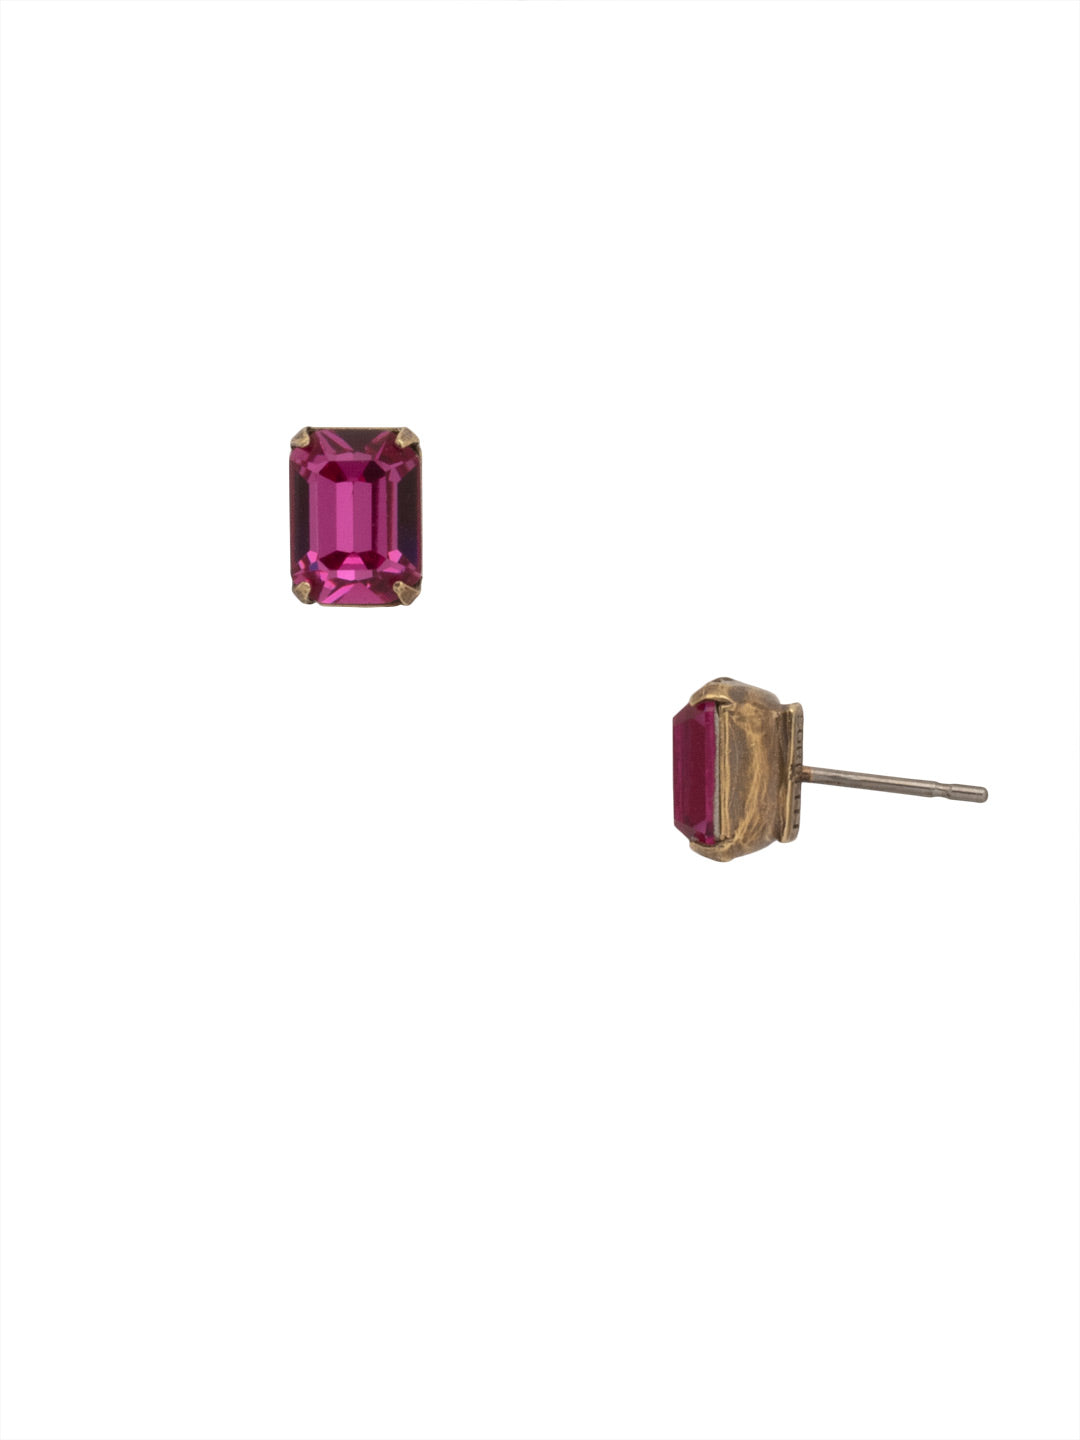 Mini Emerald Cut Stud Earrings - EBY42AGLOG - <p>Simply sophisticated. The mini emerald cut stud earrings can be worn alone or paired with anything for an extra accent to any wardrobe. From Sorrelli's Looking Glass collection in our Antique Gold-tone finish.</p>